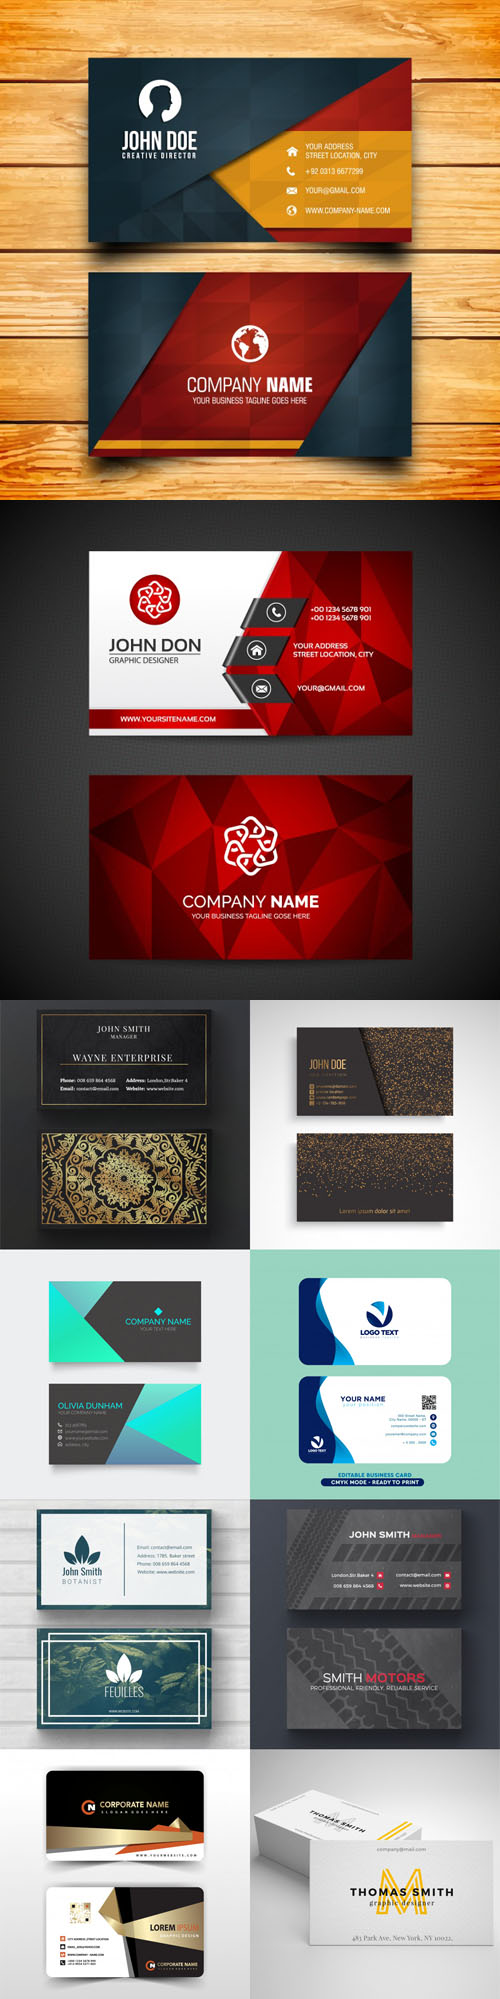 10 Modern Professional Business Cards Templates in [EPS/PSD]